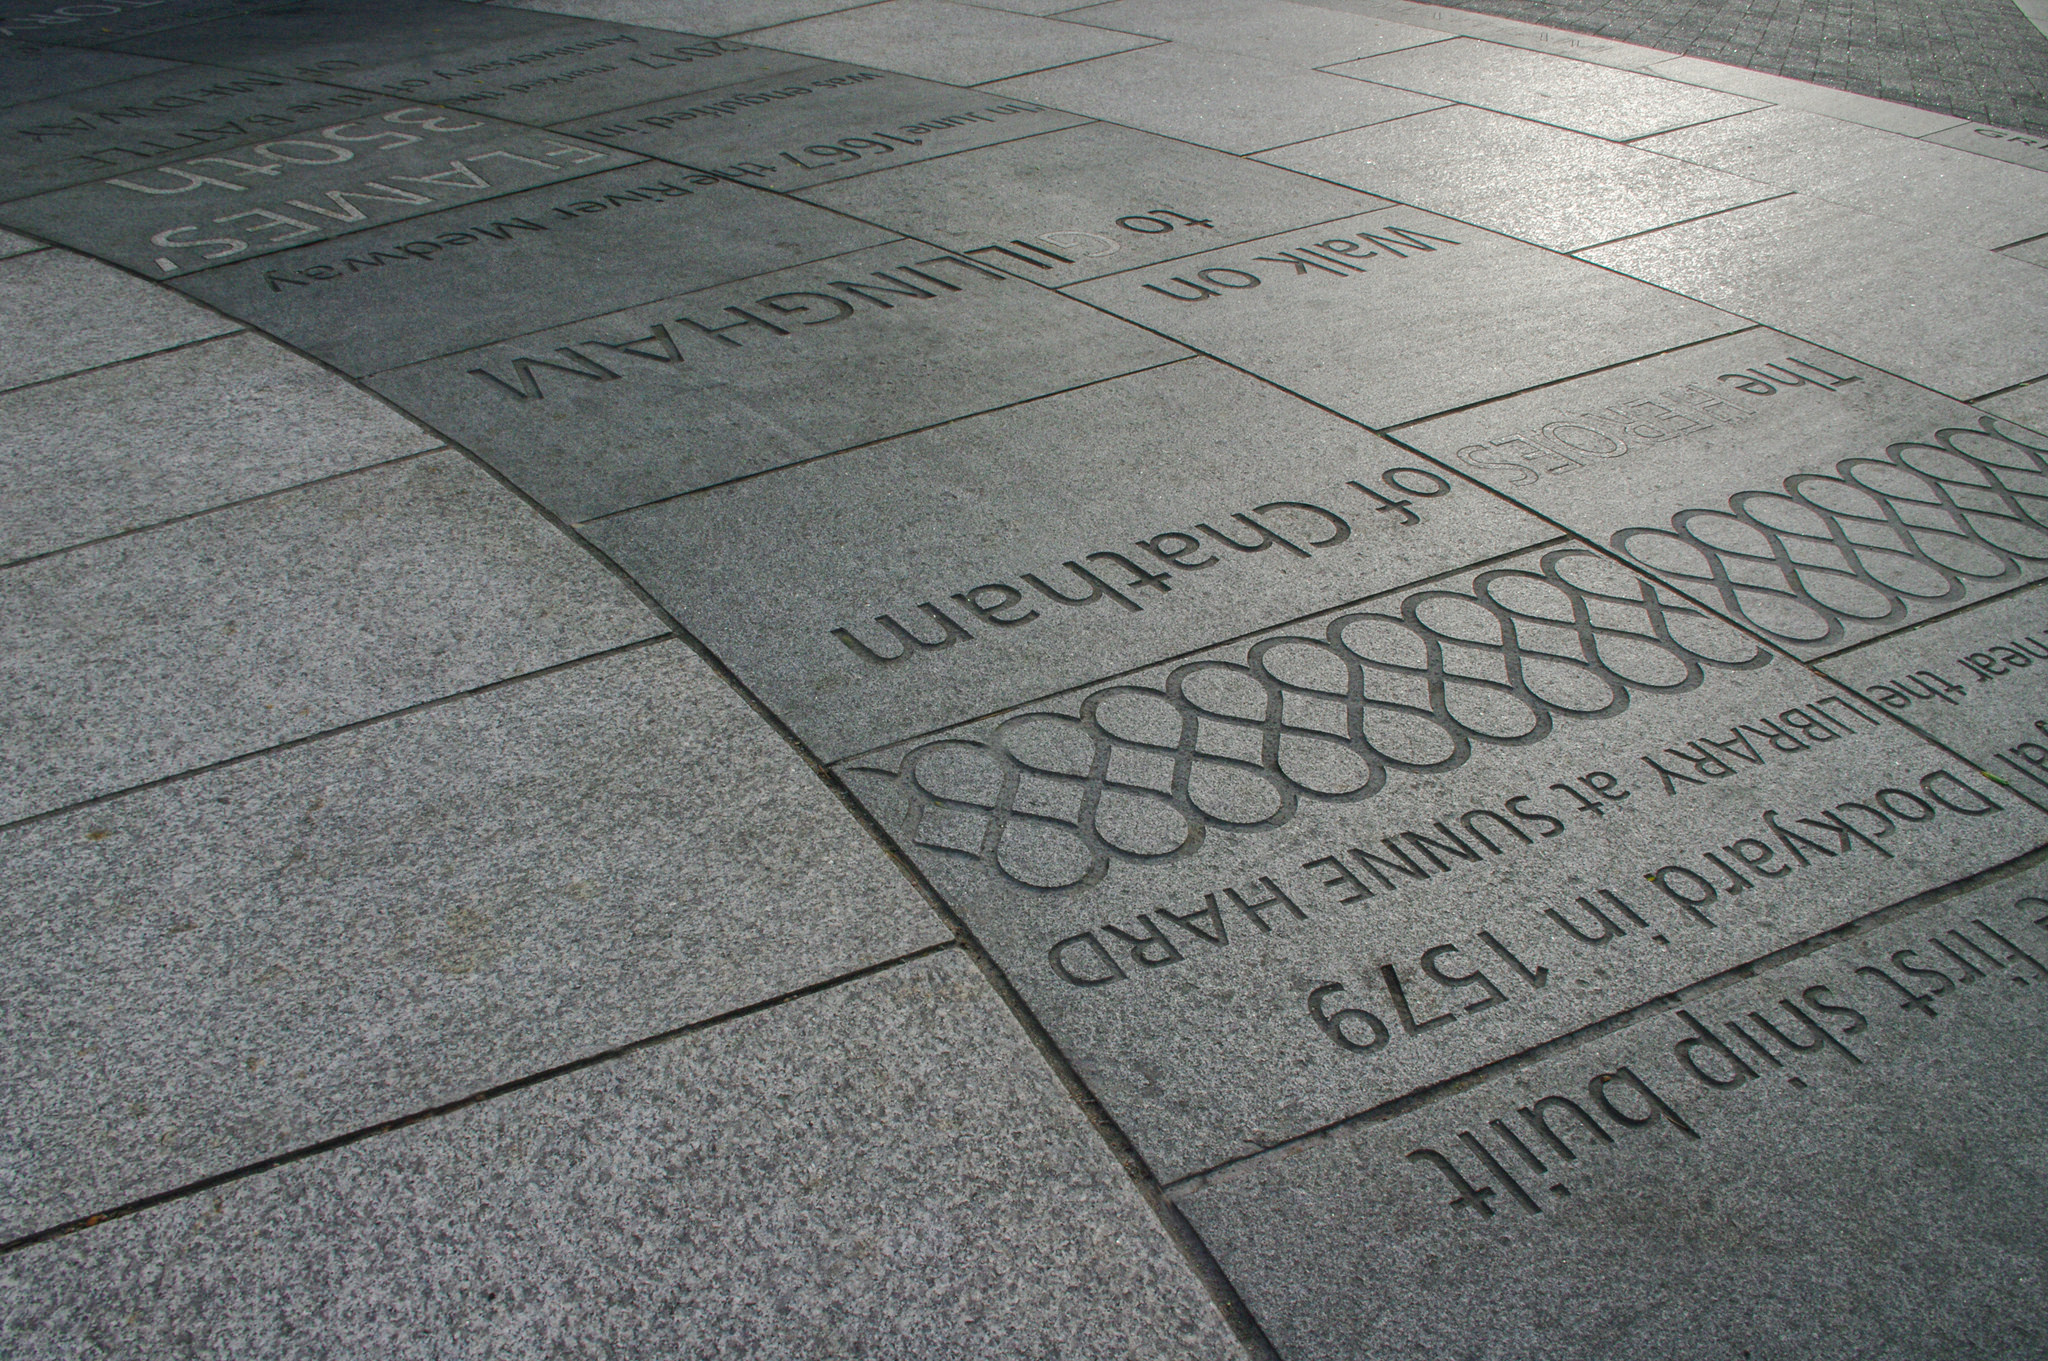 sandblasted text and pattern work in grey granite paving